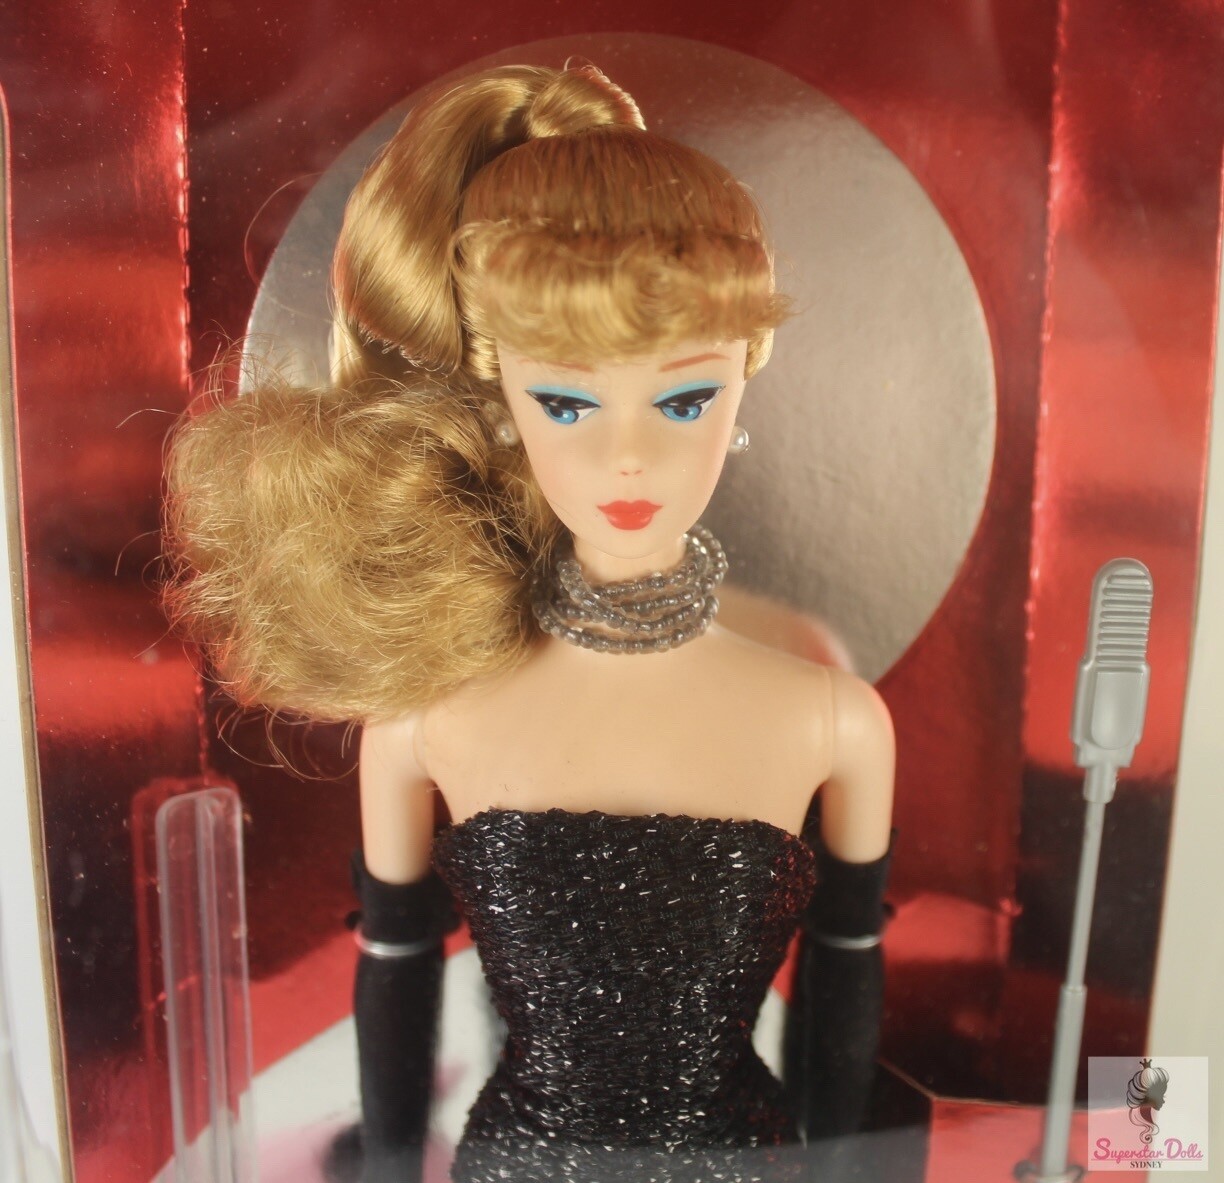 1994 Solo in the Spotlight (Blonde) Vintage Reproduction Barbie Doll